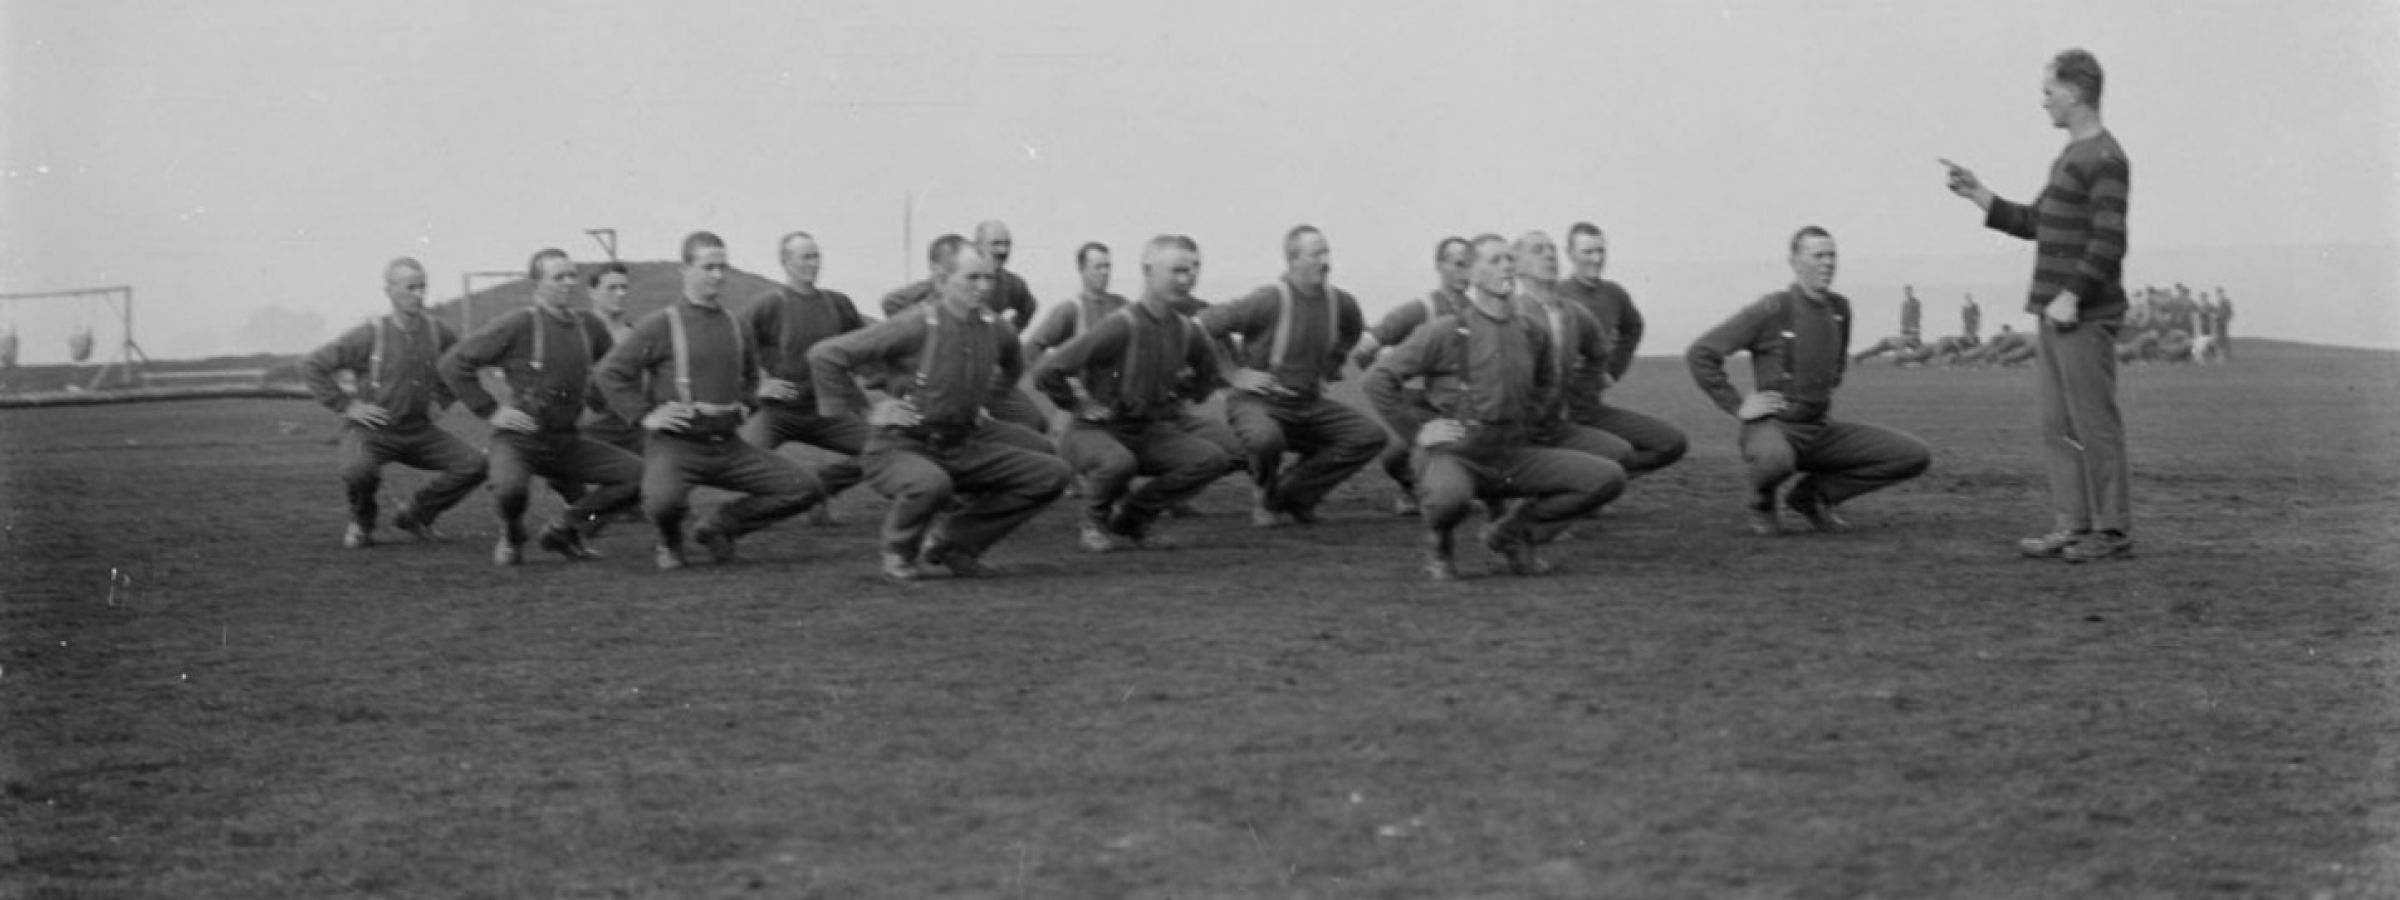 New Zealand soldiers from the Canterbury Battalion exercising under direction from their instructor. Sling Camp, Bulford, England.